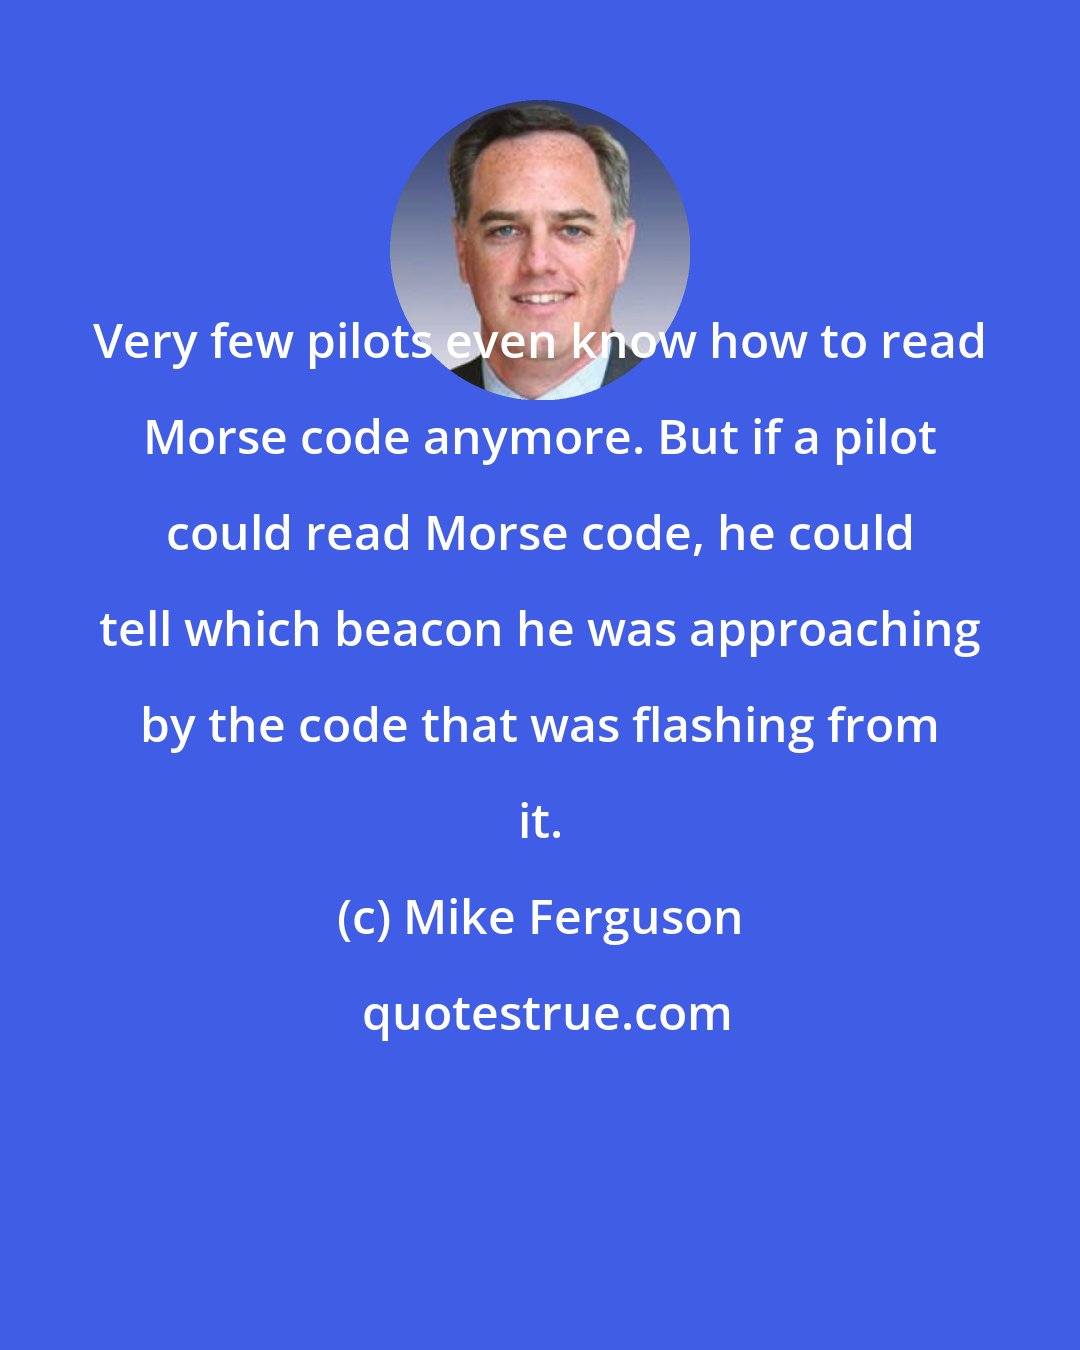 Mike Ferguson: Very few pilots even know how to read Morse code anymore. But if a pilot could read Morse code, he could tell which beacon he was approaching by the code that was flashing from it.